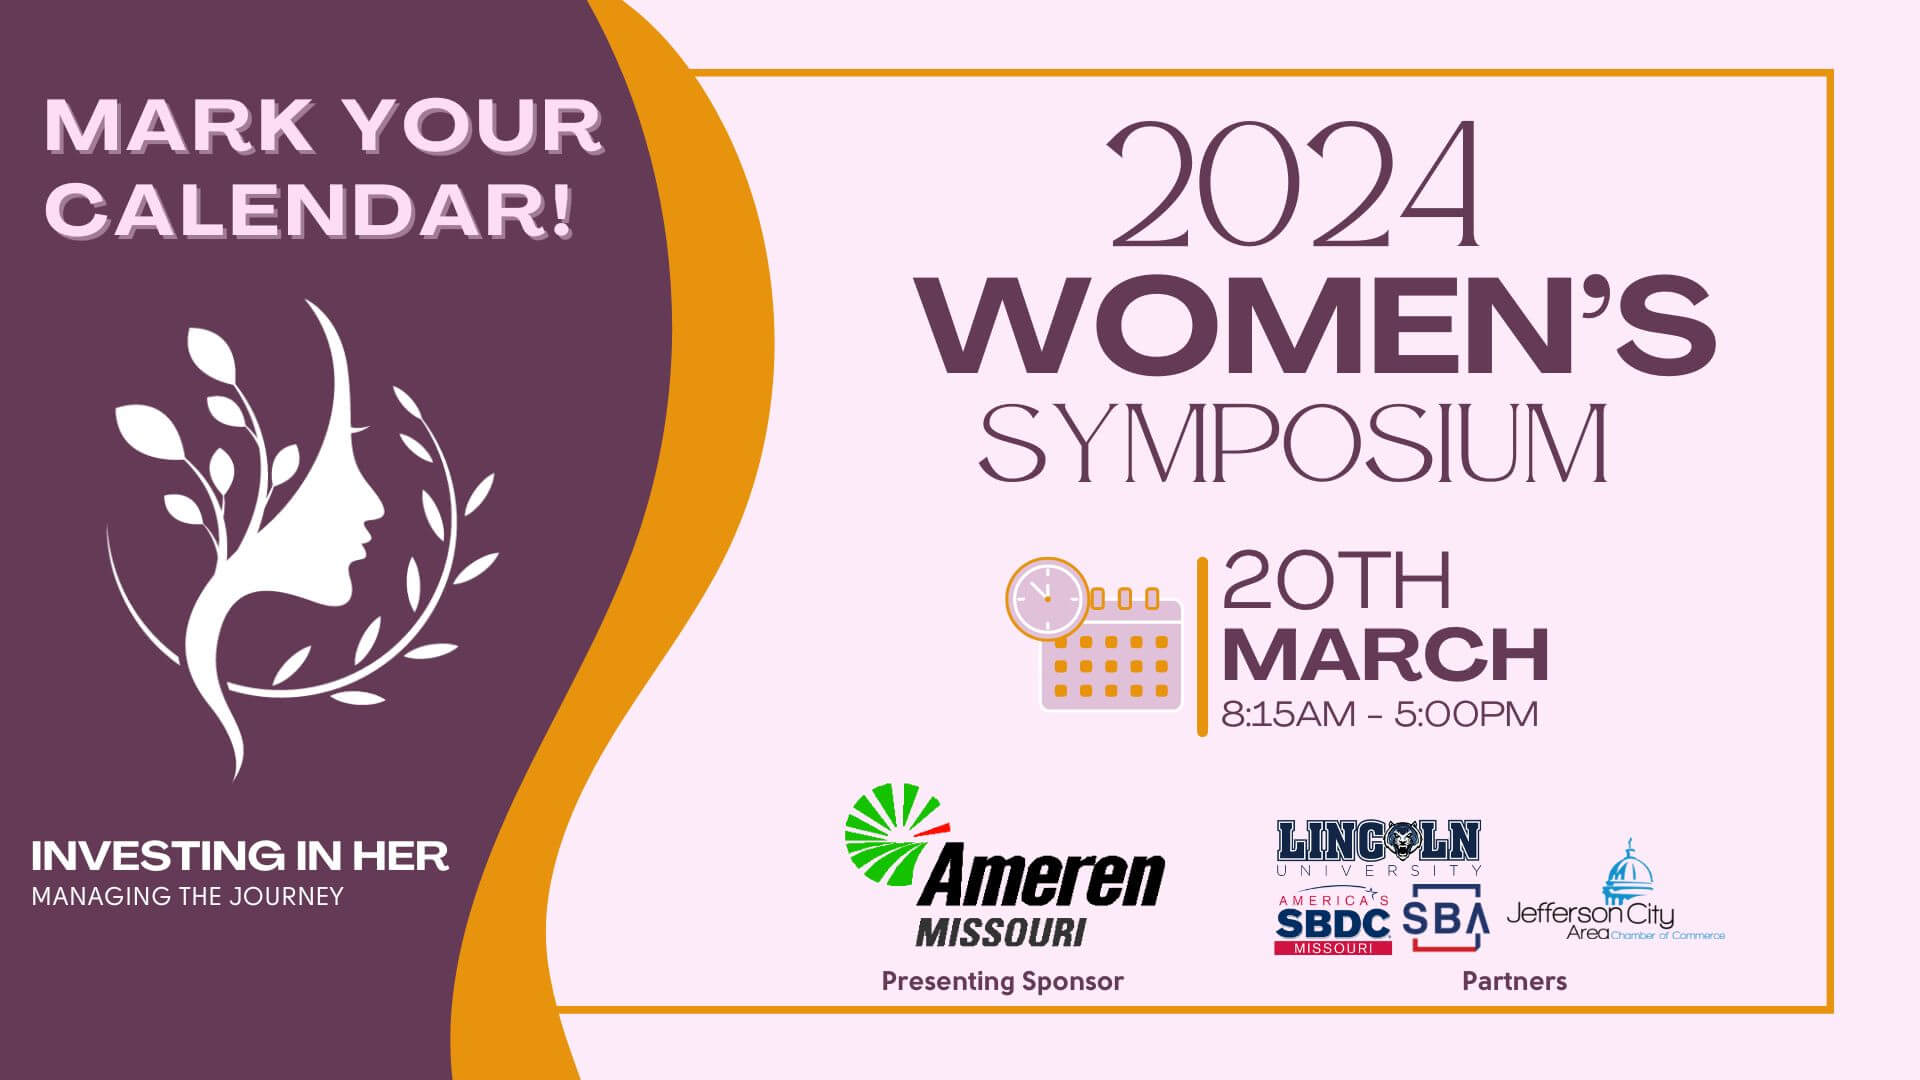 Women's Symposium Save the Date